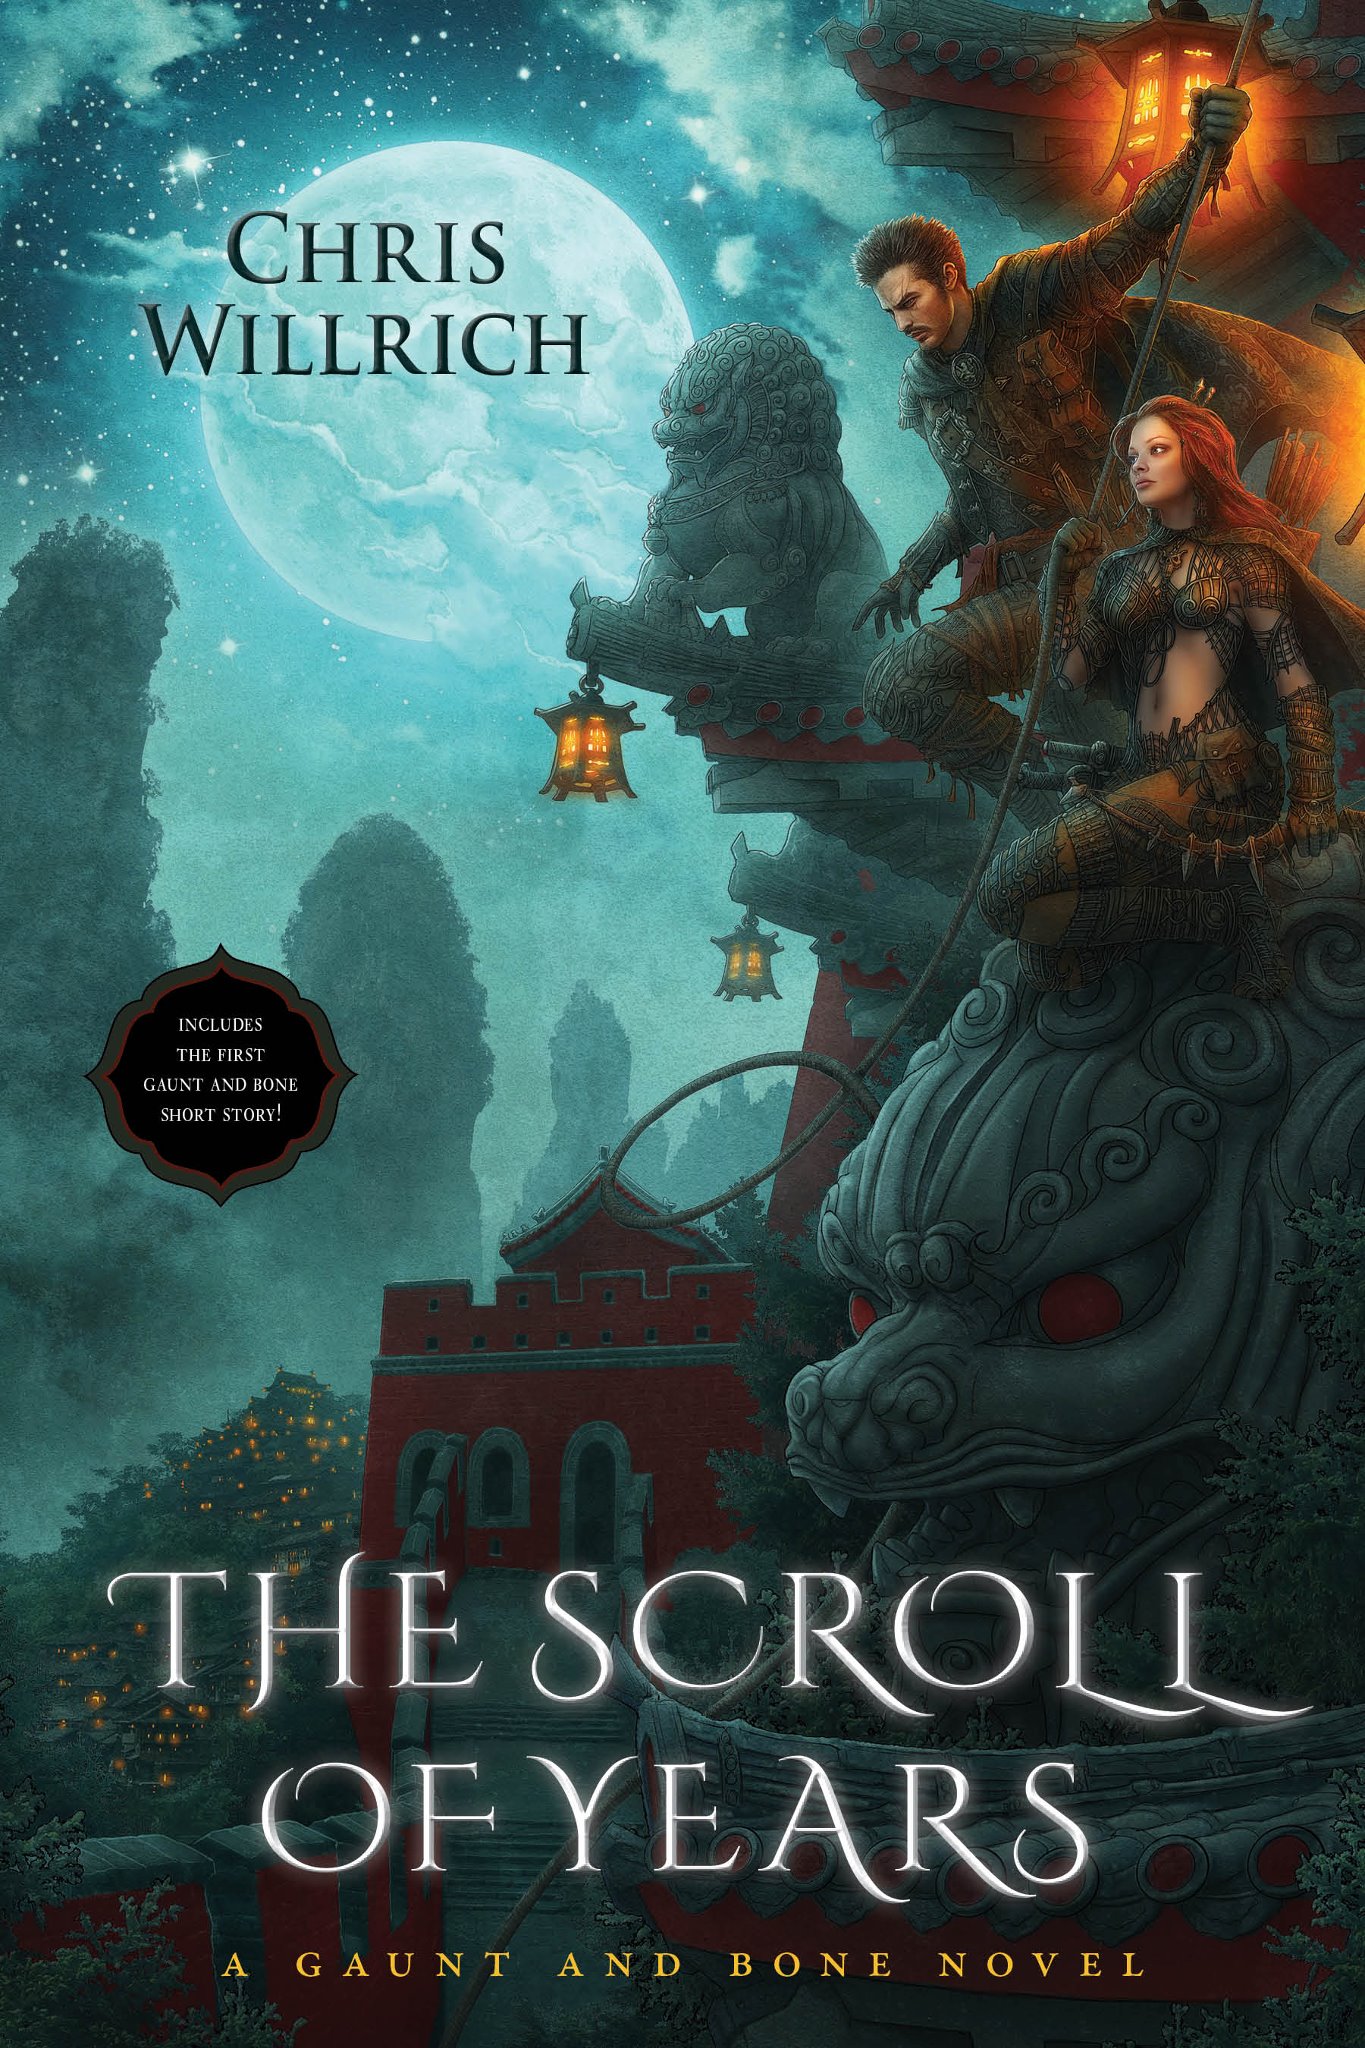 The Scroll of Years (Gaunt and Bone #1), A Book Review